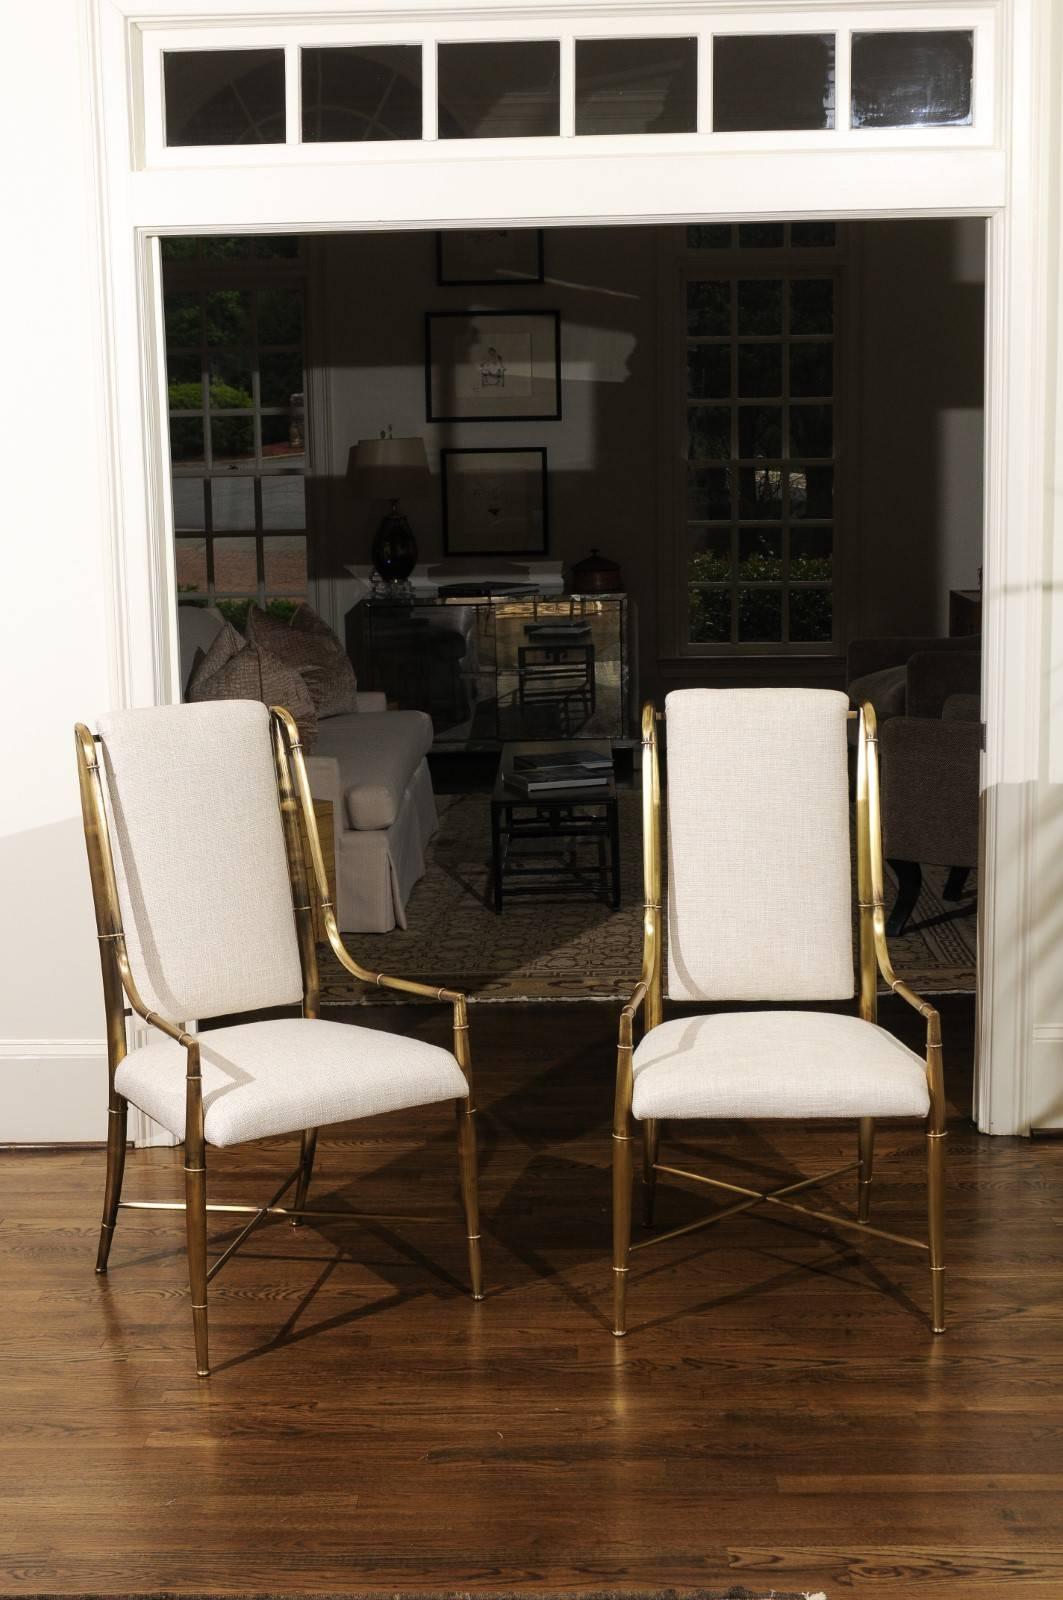 These magnificent dining chairs are shipped as professionally photographed and described in the narrative: completely Installation Ready. Expert custom upholstery service is available.

An exquisite set of eight (8) solid brass faux bamboo dining